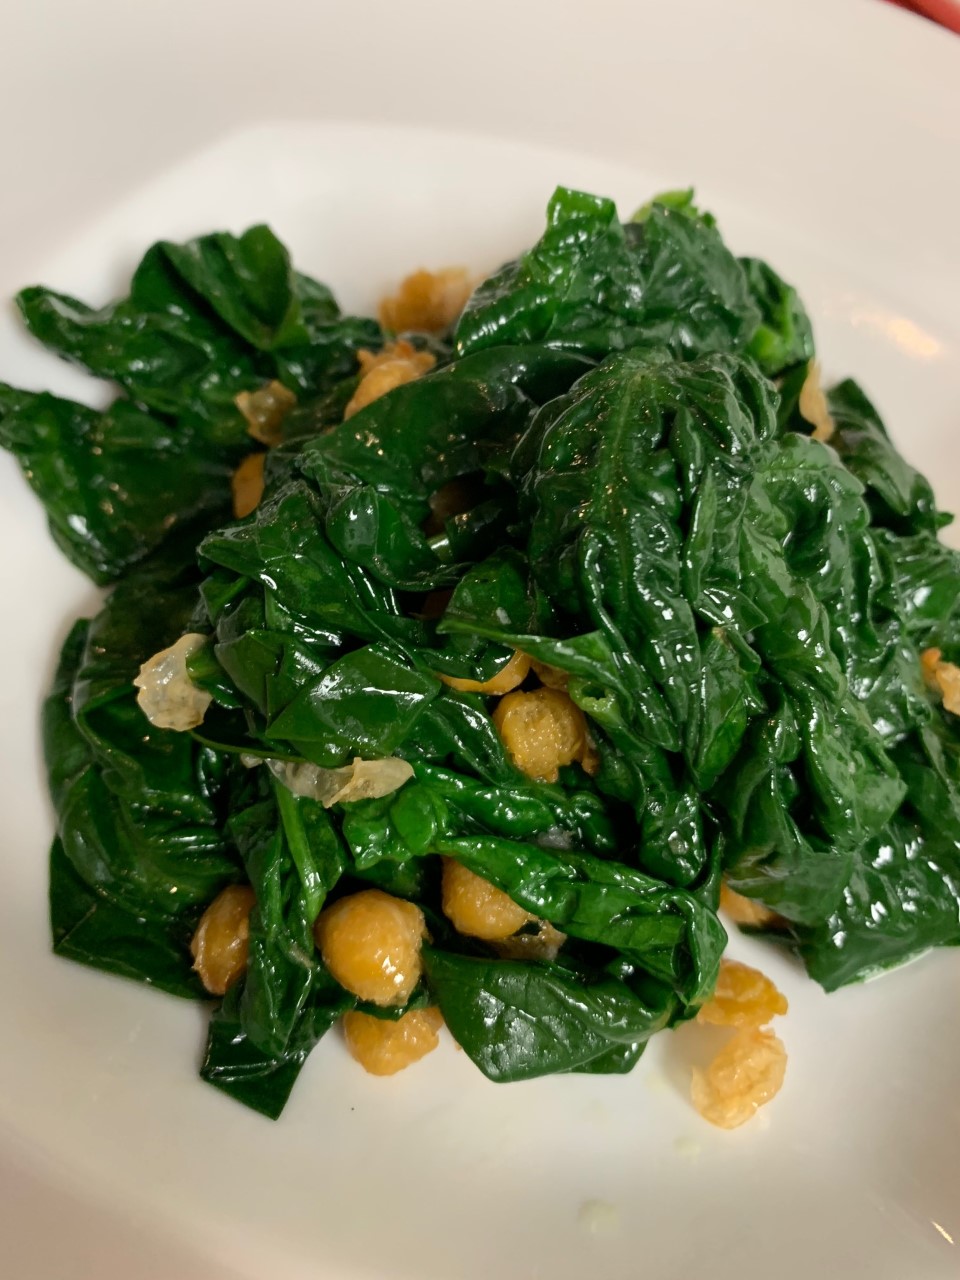 Steamed spinach tossed with extra virgin olive oil and chick peas